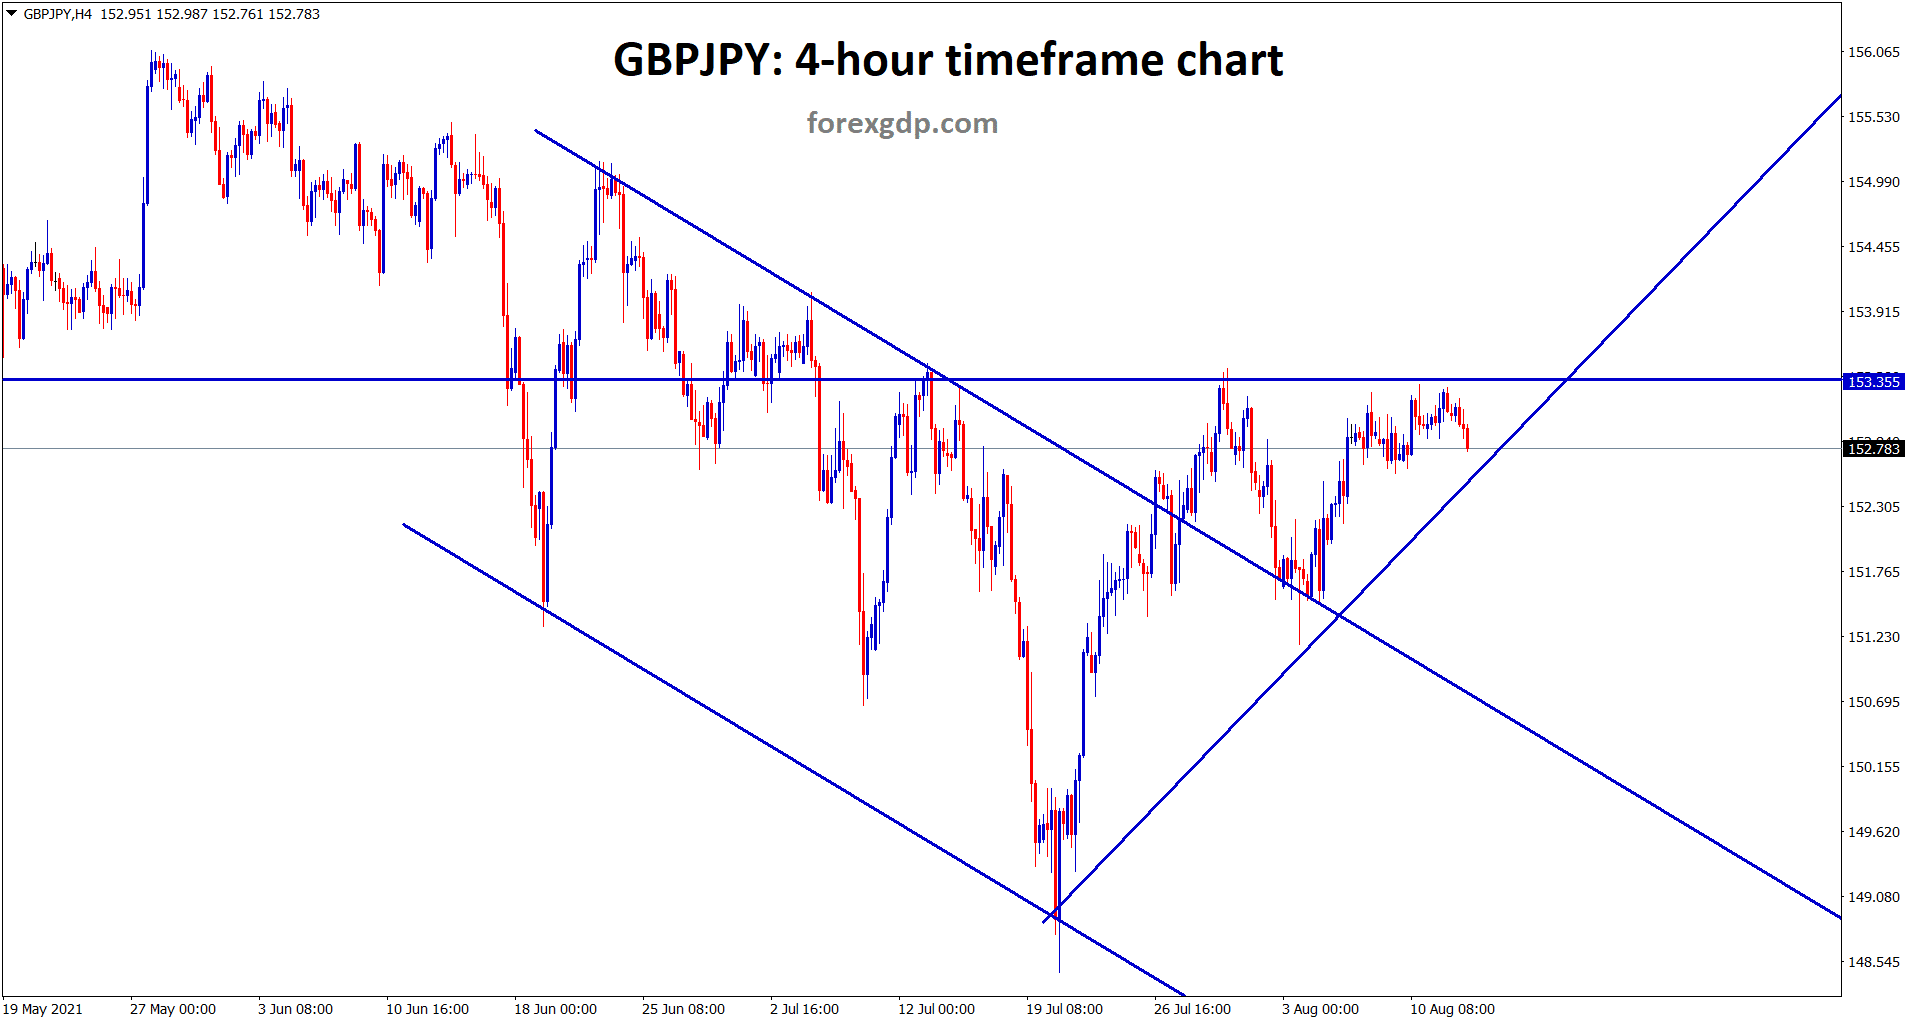 In another view 4 hour timeframe GBPJPY has formed an ascending triangle pattern recently